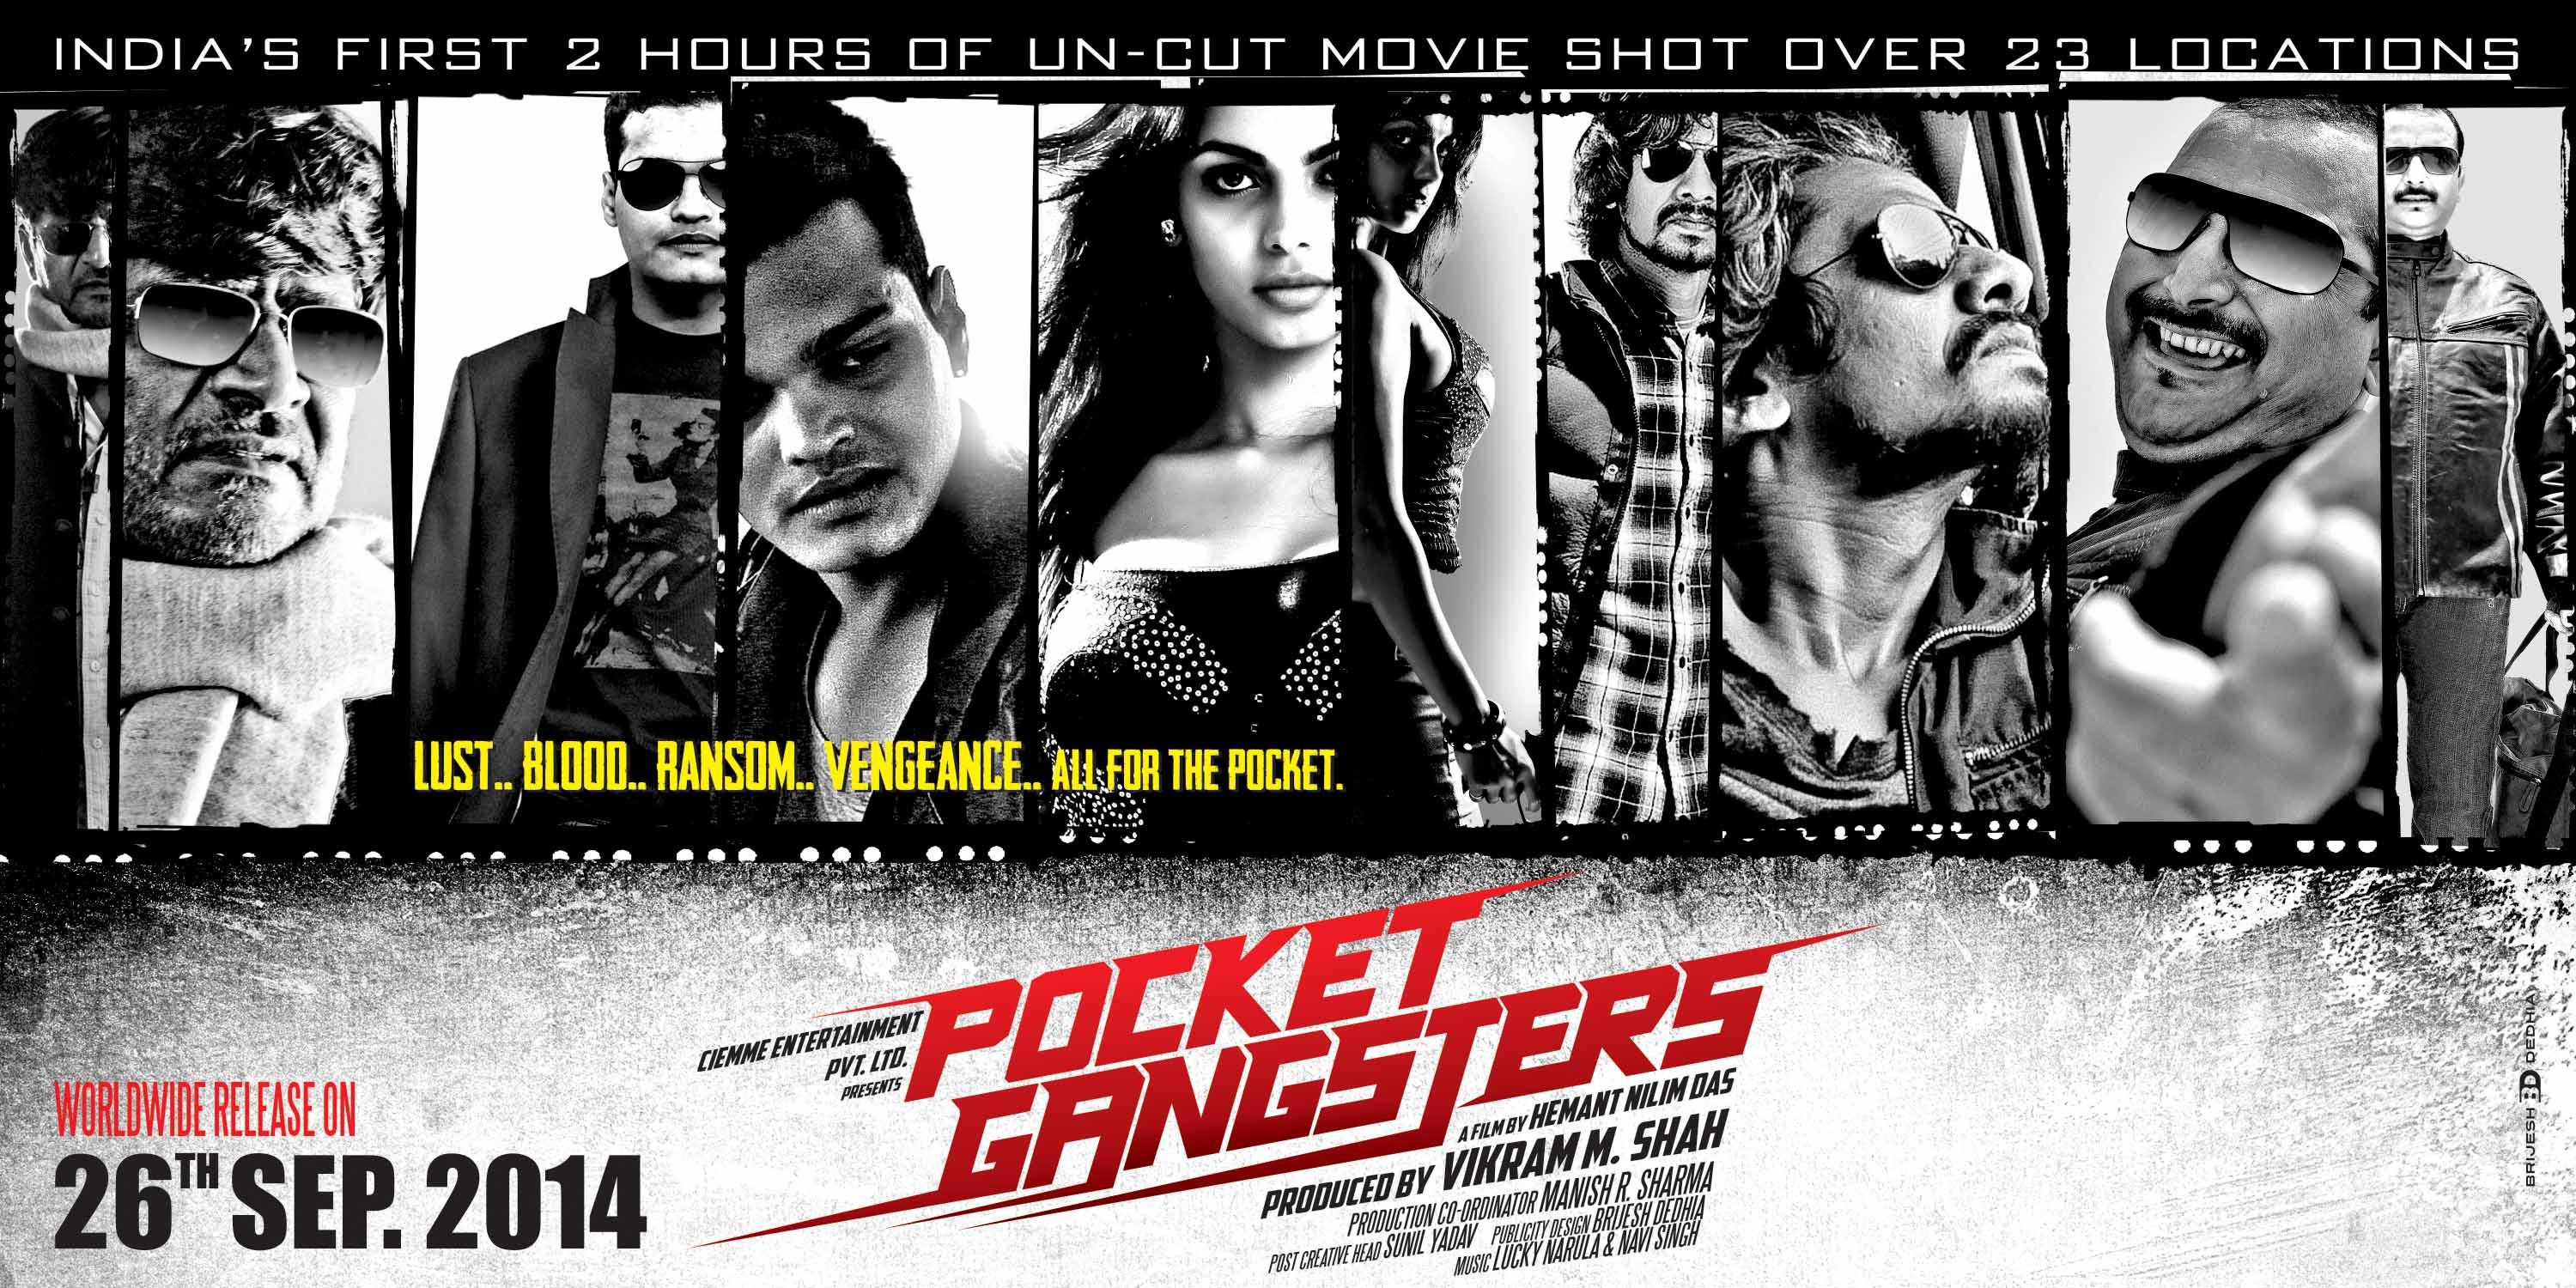 Pocket Gangsters Movie Wallpapers